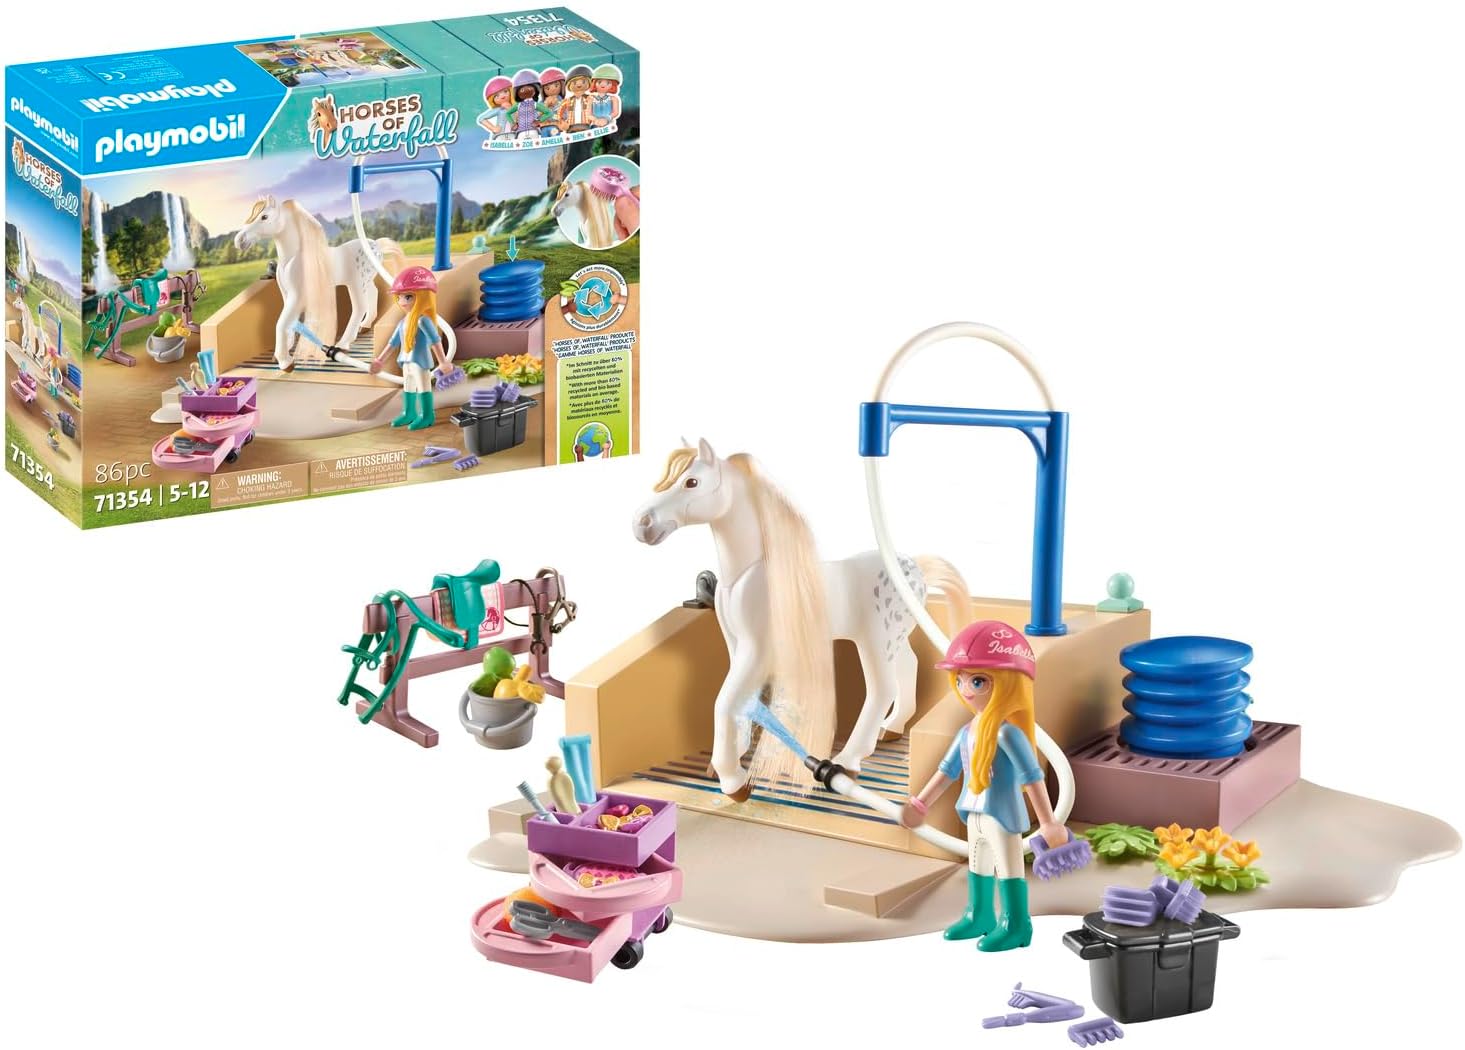 PLAYMOBIL Horses of Waterfall 71354 Isabella & Lioness with Washing Area, Extensive Horse Care, Extensive Rides and Shared Selfies, Sustainable Toy for Children from 5 Years